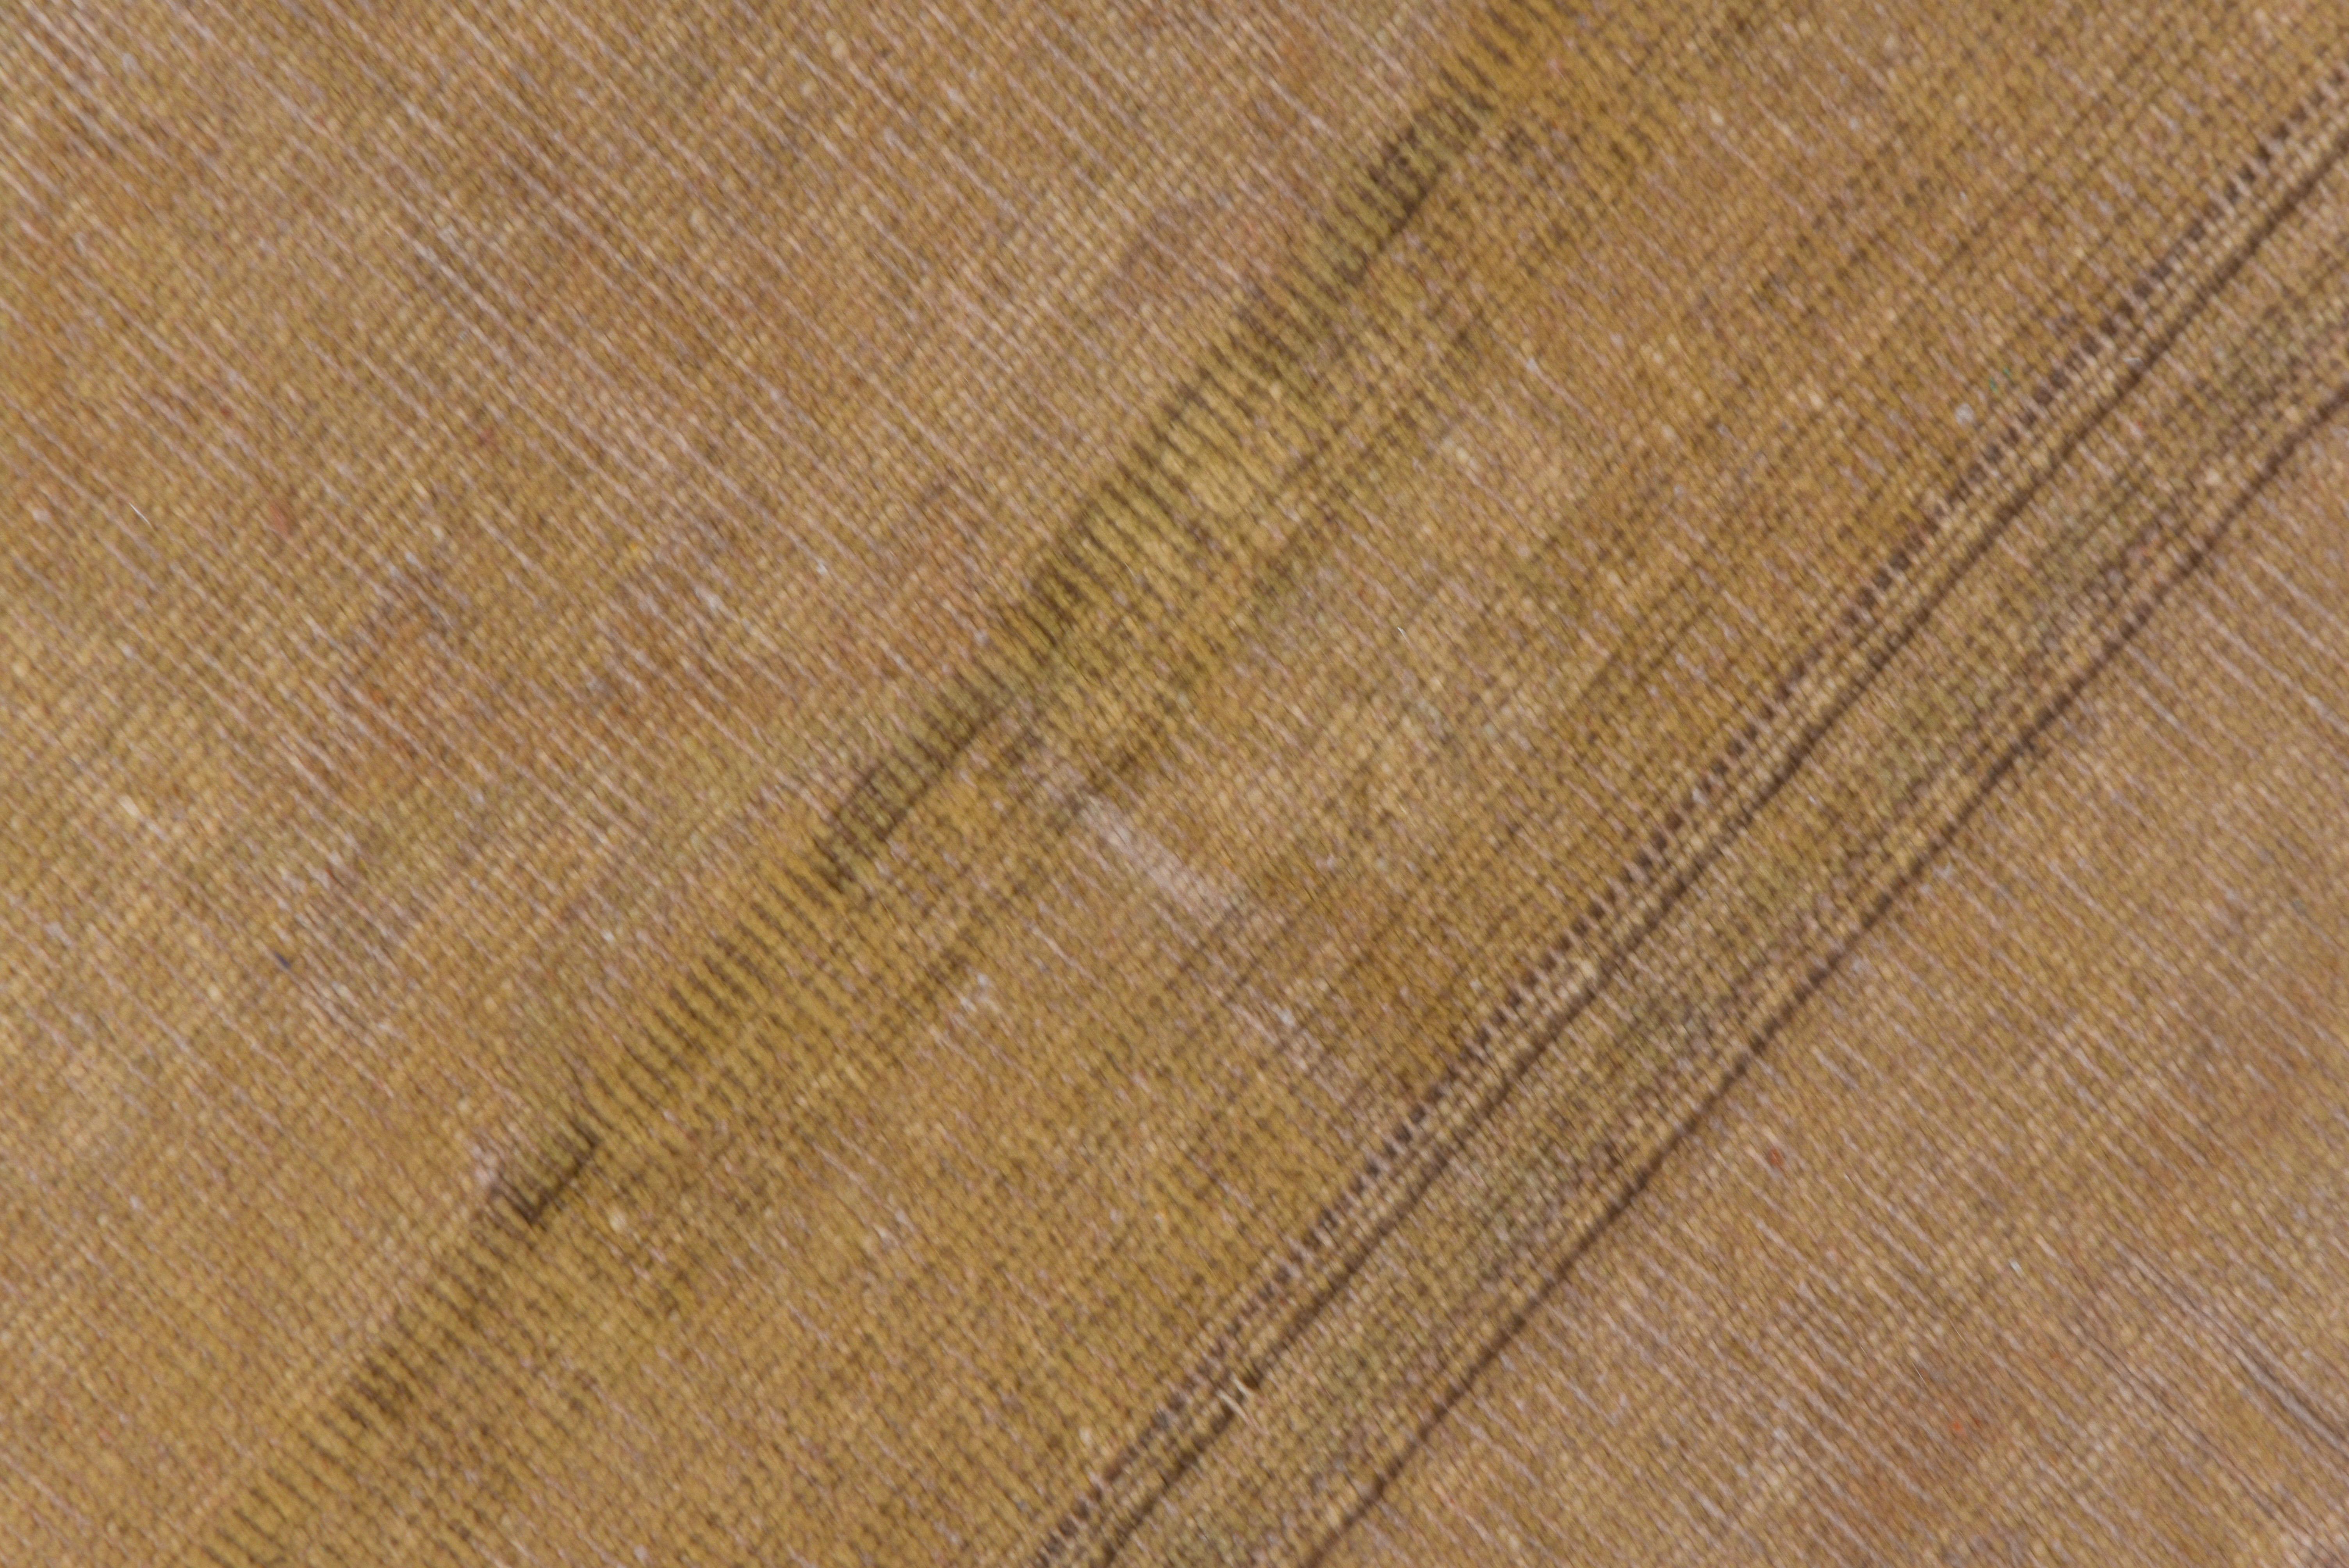 Melas from the SW Turkish coast, this square vintage scatter is dominated by thin bundles of dark brown striations on the light brown field with sand details.